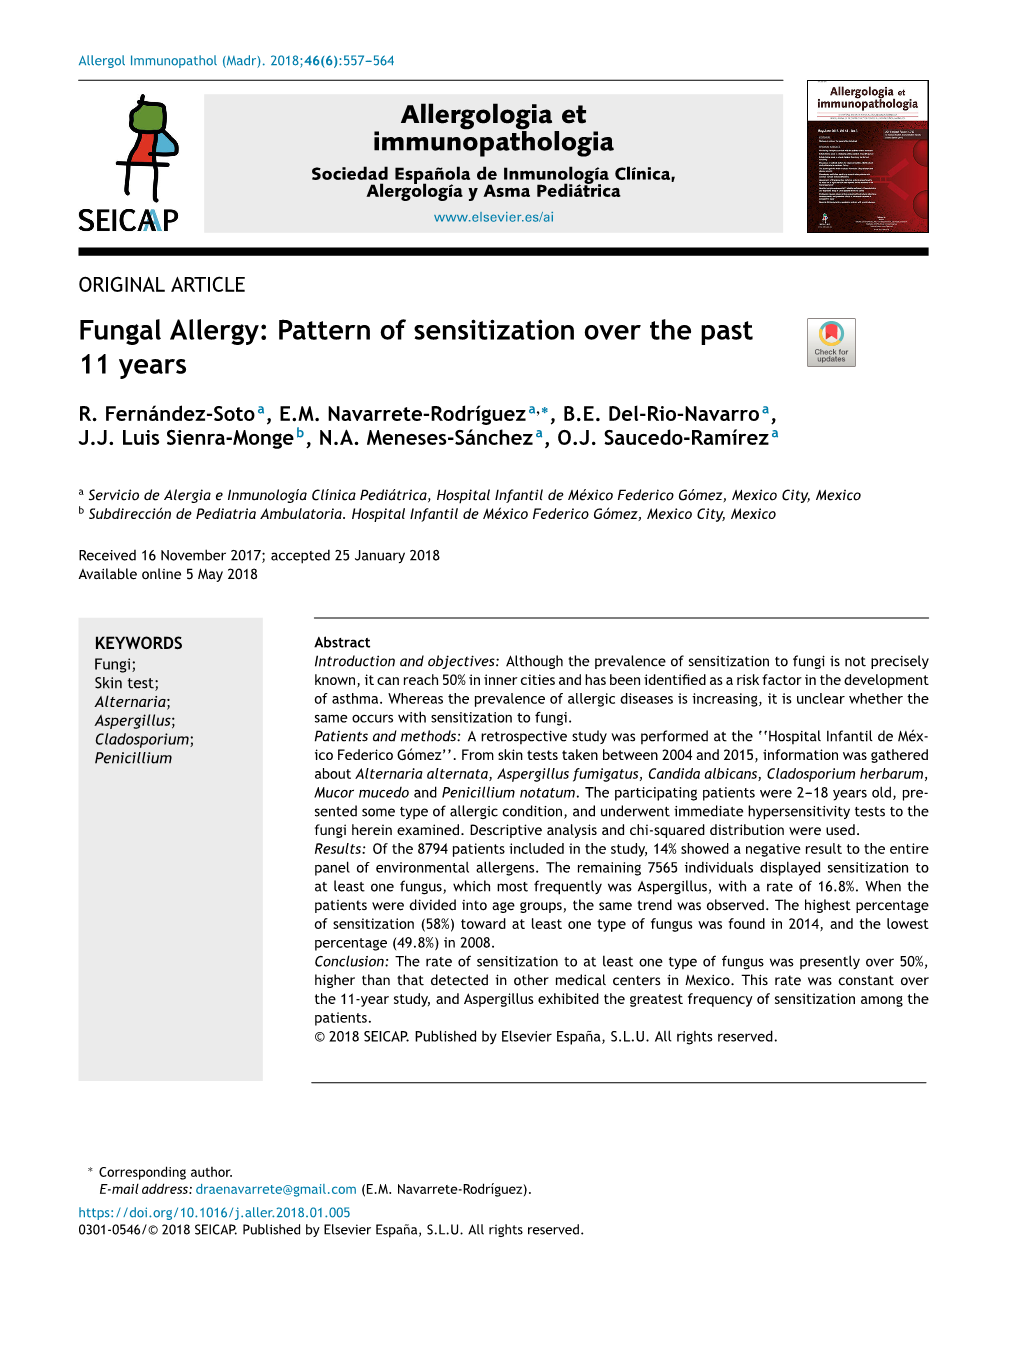 Fungal Allergy: Pattern of Sensitization Over the Past